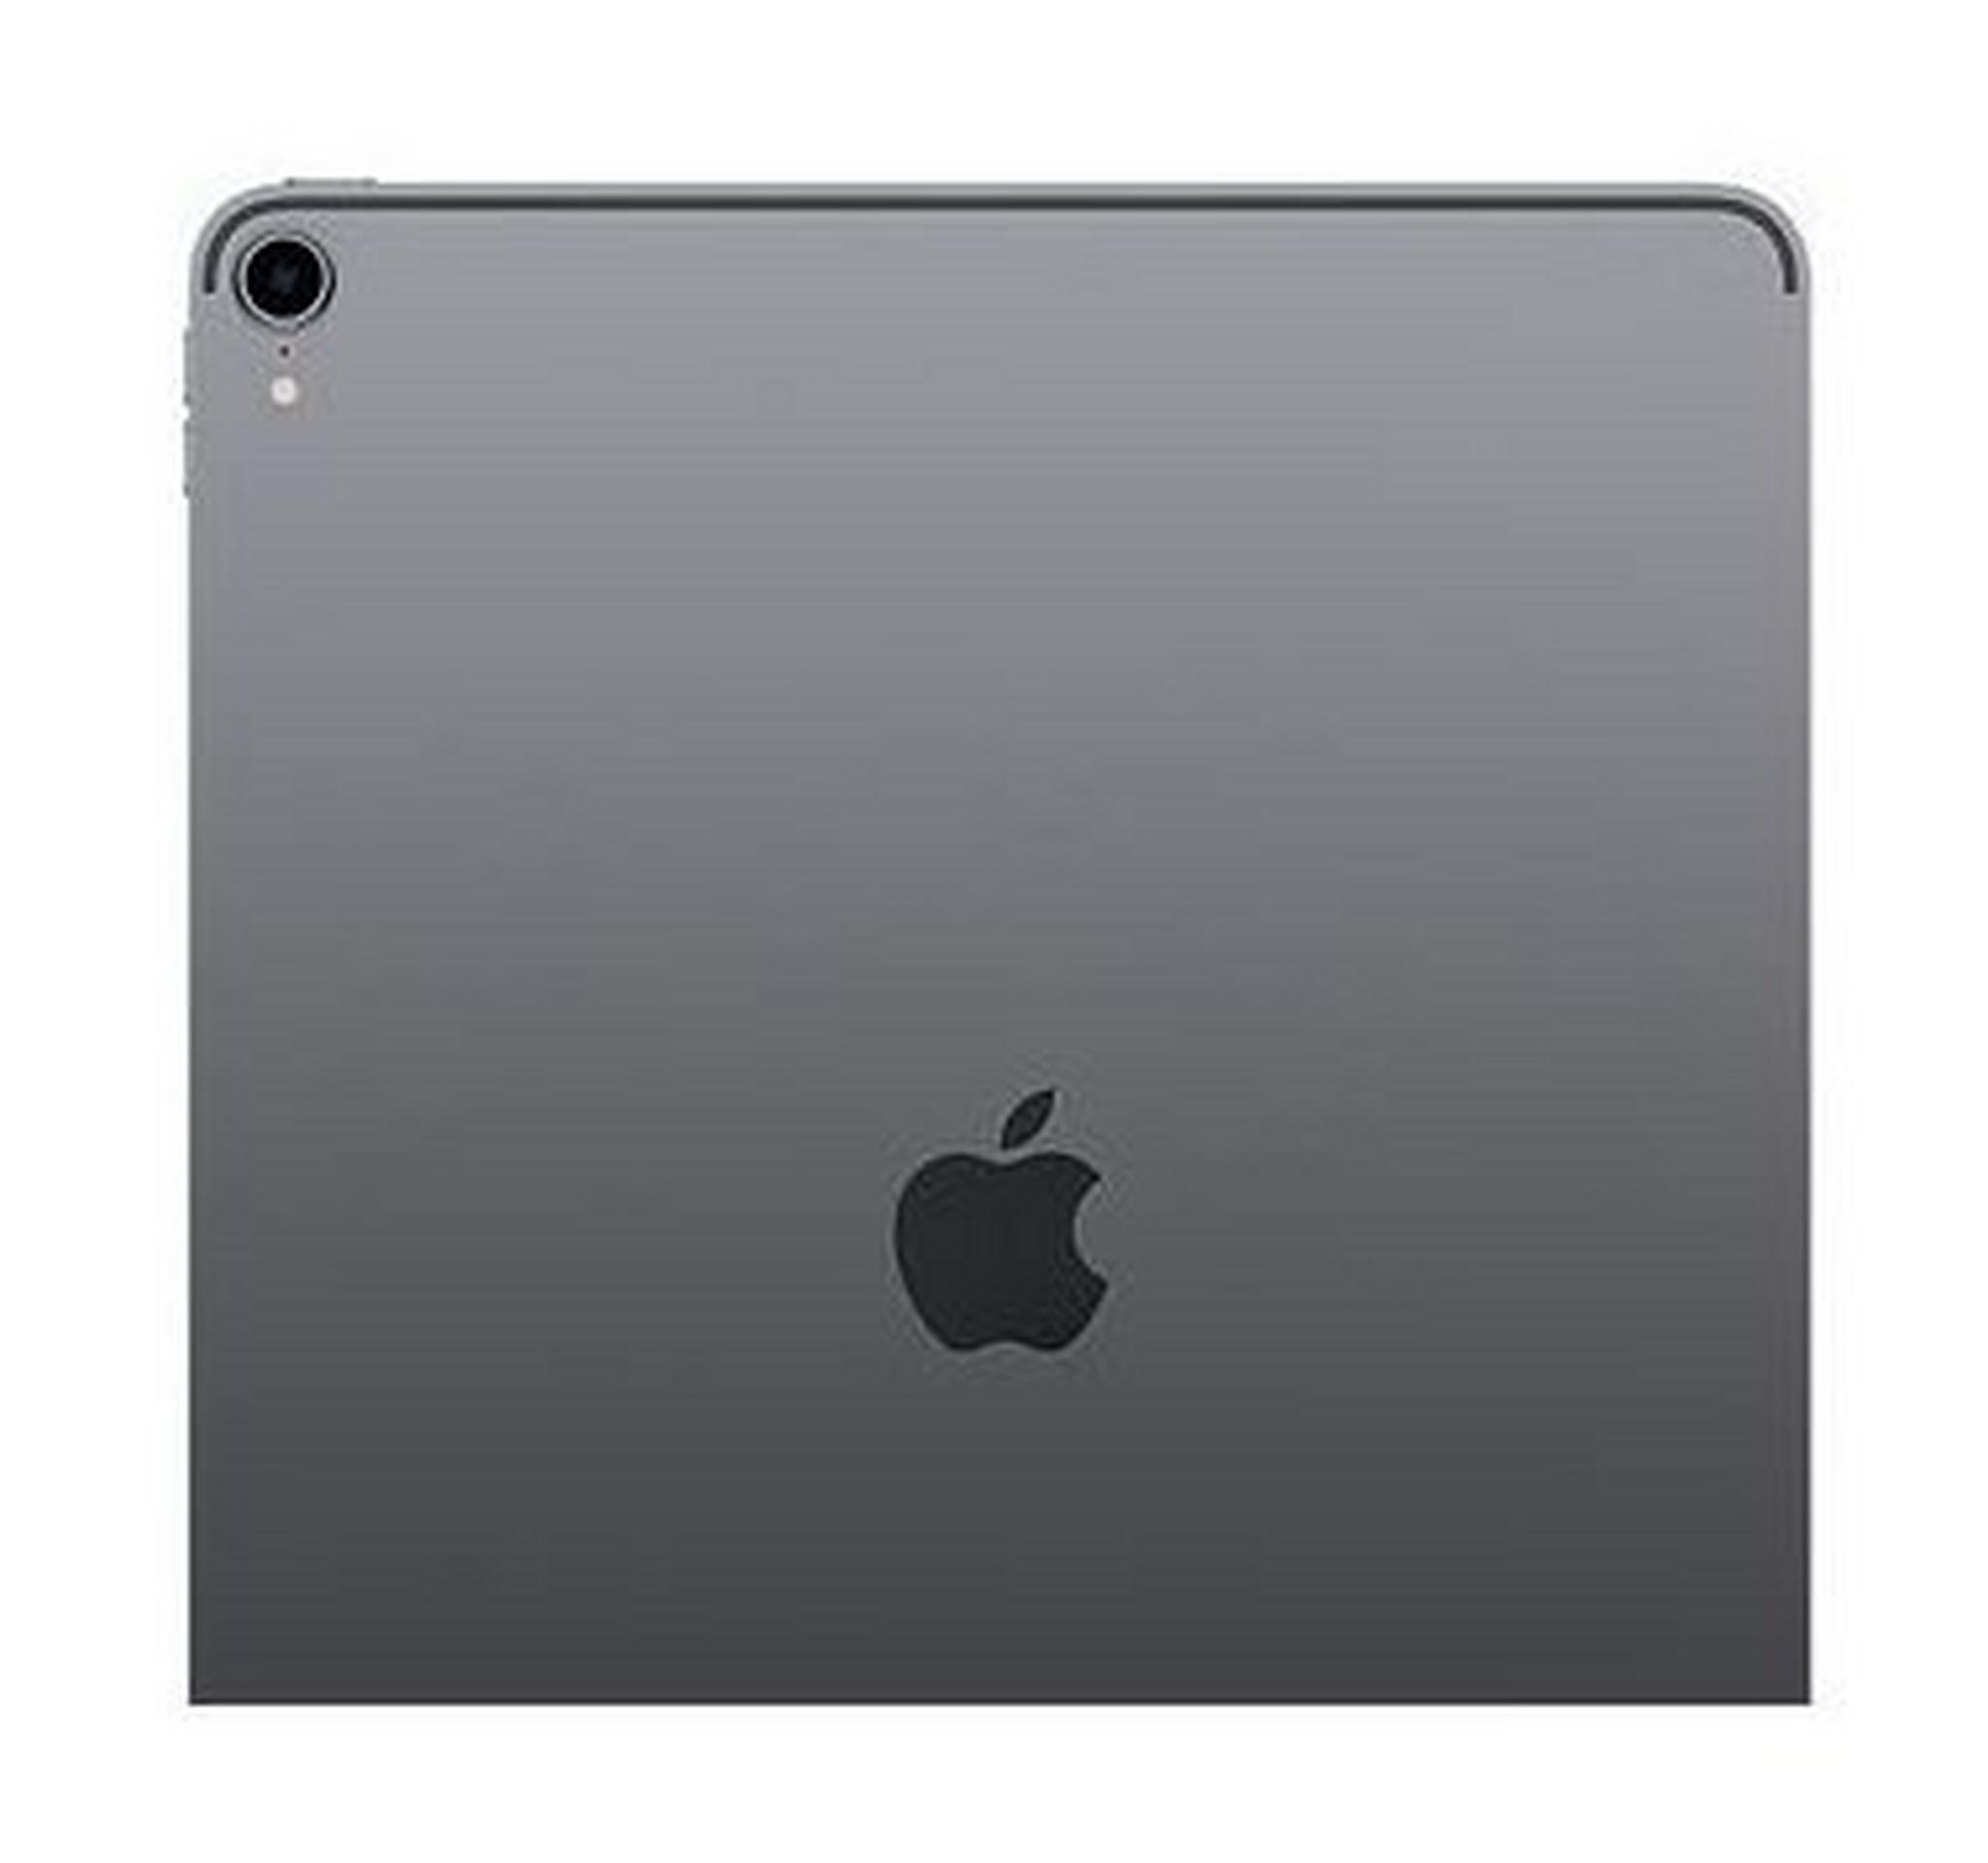 Apple iPad Pro 2018 12.9-inch 64GB Wi-Fi Only Tablet - Grey